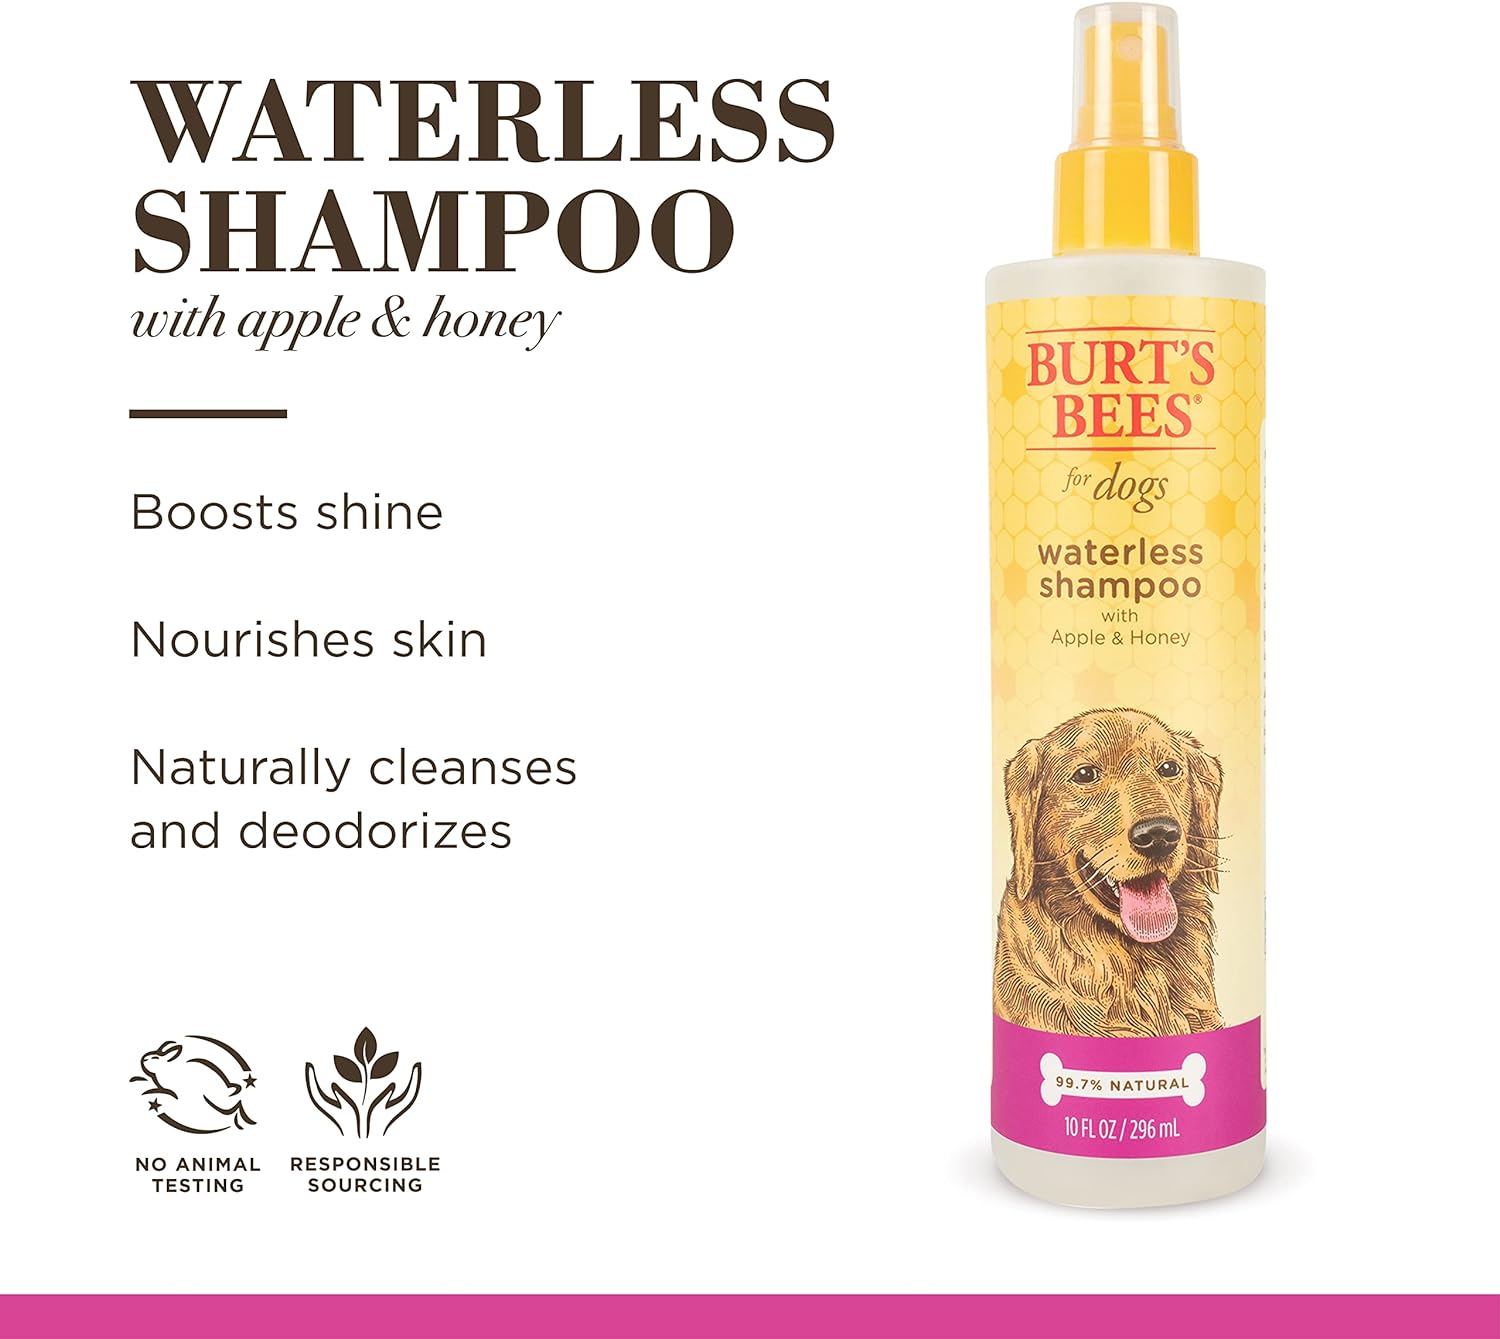 Burt's Bees for Pets Natural Waterless Shampoo Spray for Dogs | Made with Apple and Honey | Easy Way to Bathe Your Dog Naturally | Cruelty Free, Sulfate & Paraben Free, Made in USA - 10 oz - 3 Pack